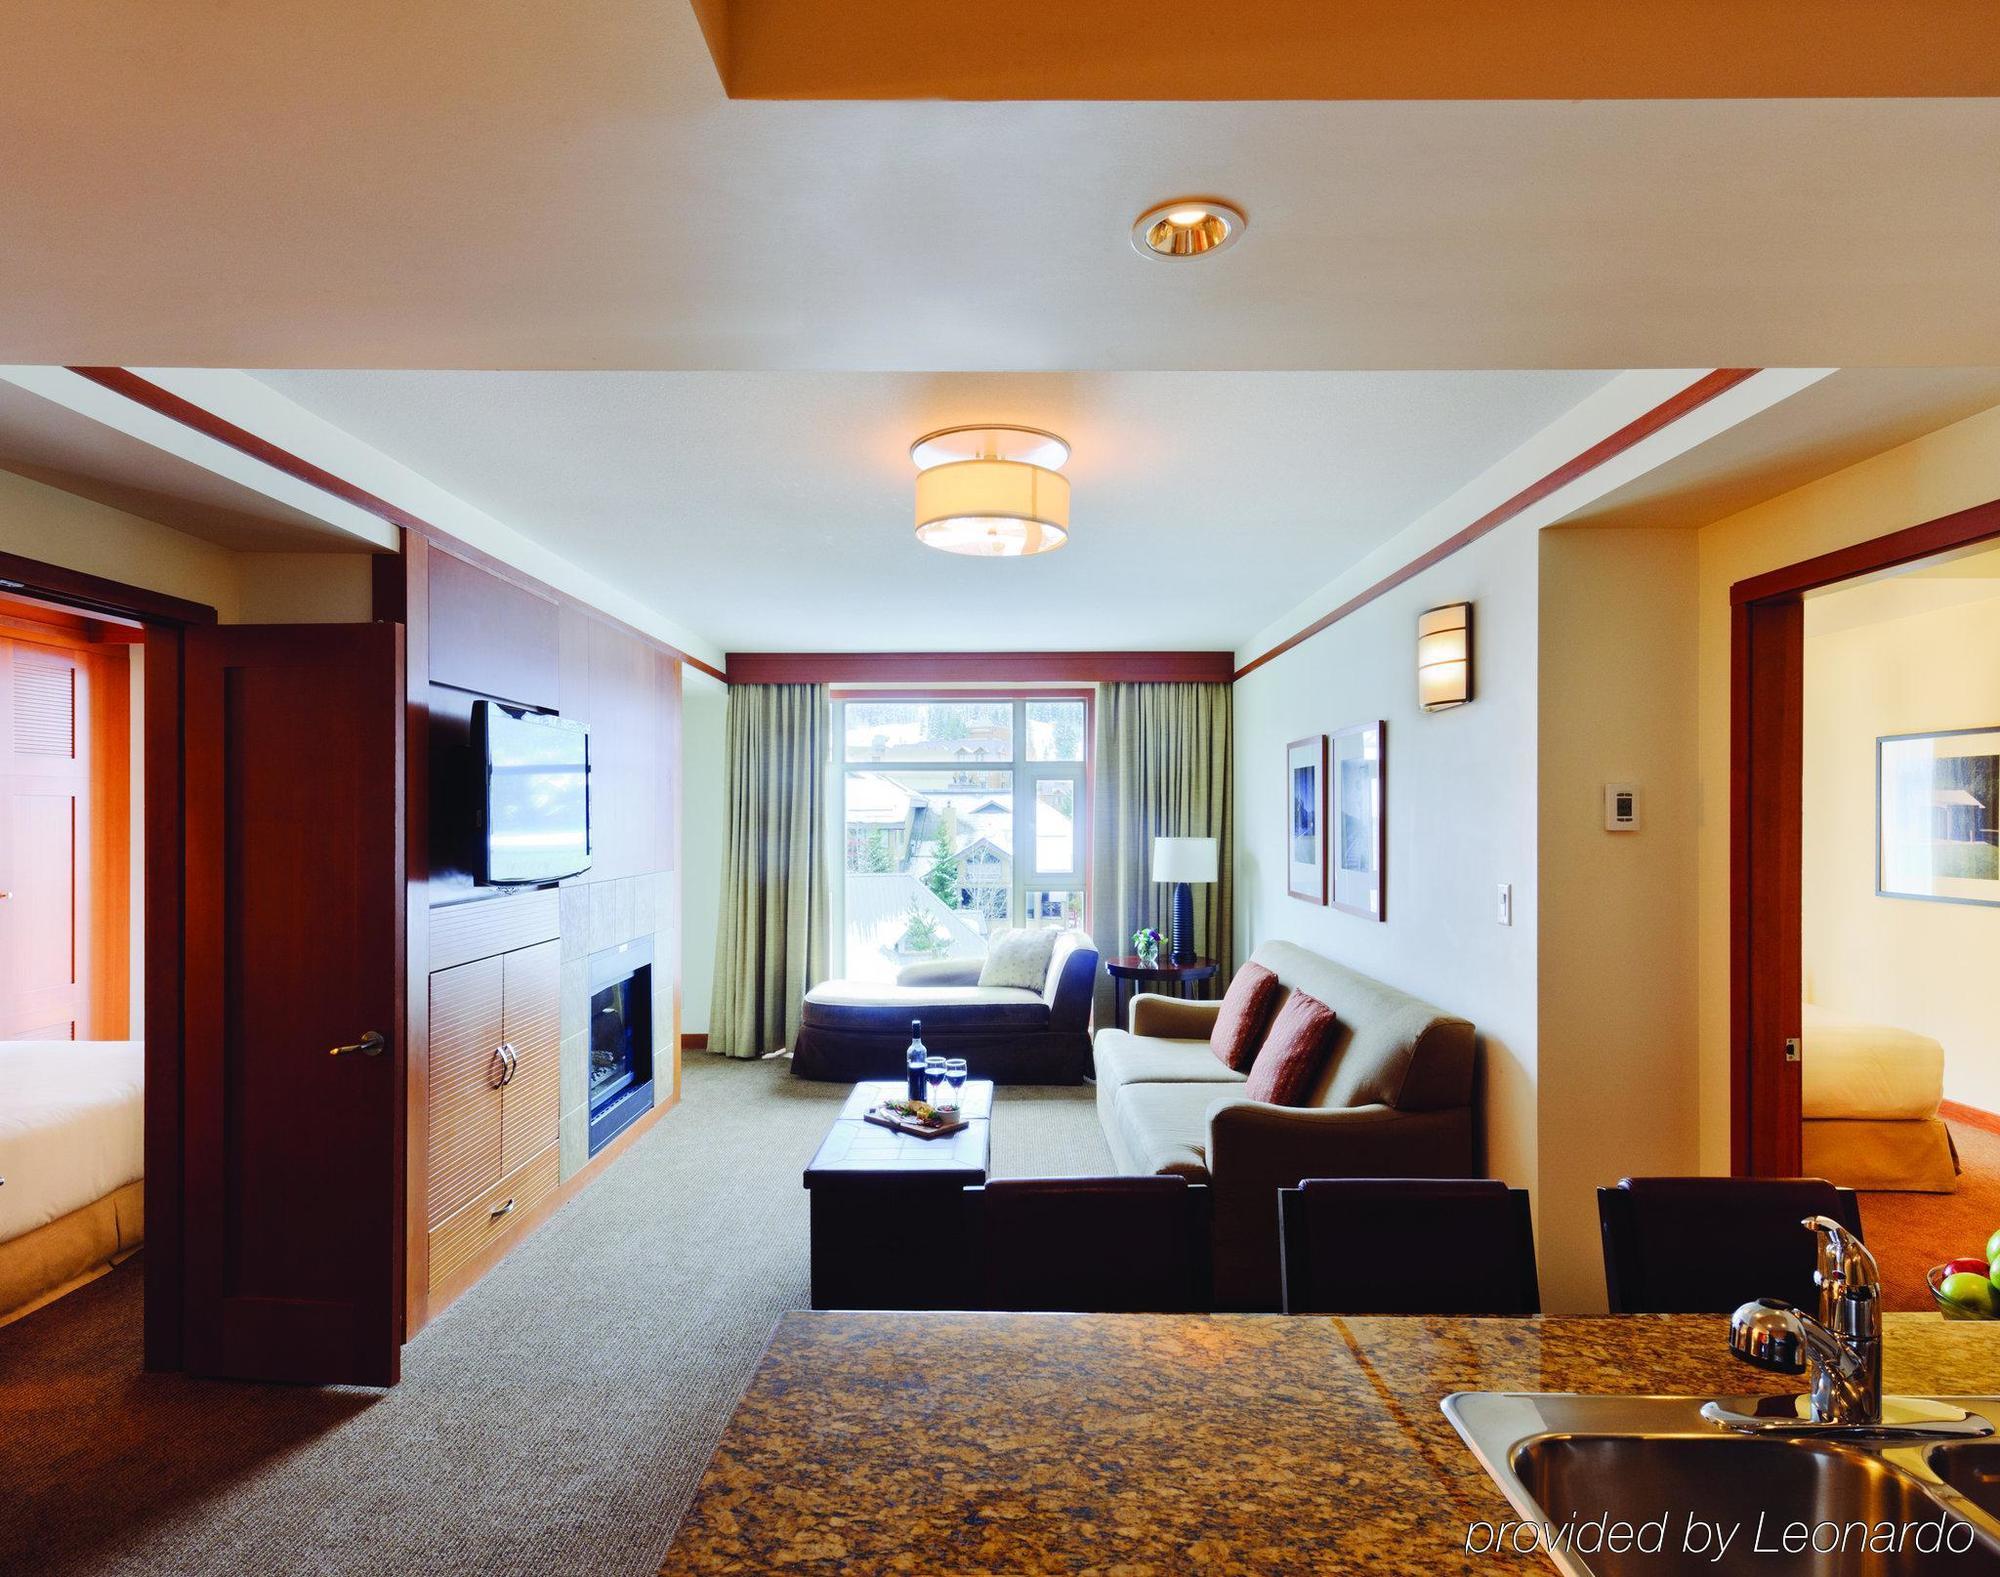 Pan Pacific Whistler Village Centre Room photo